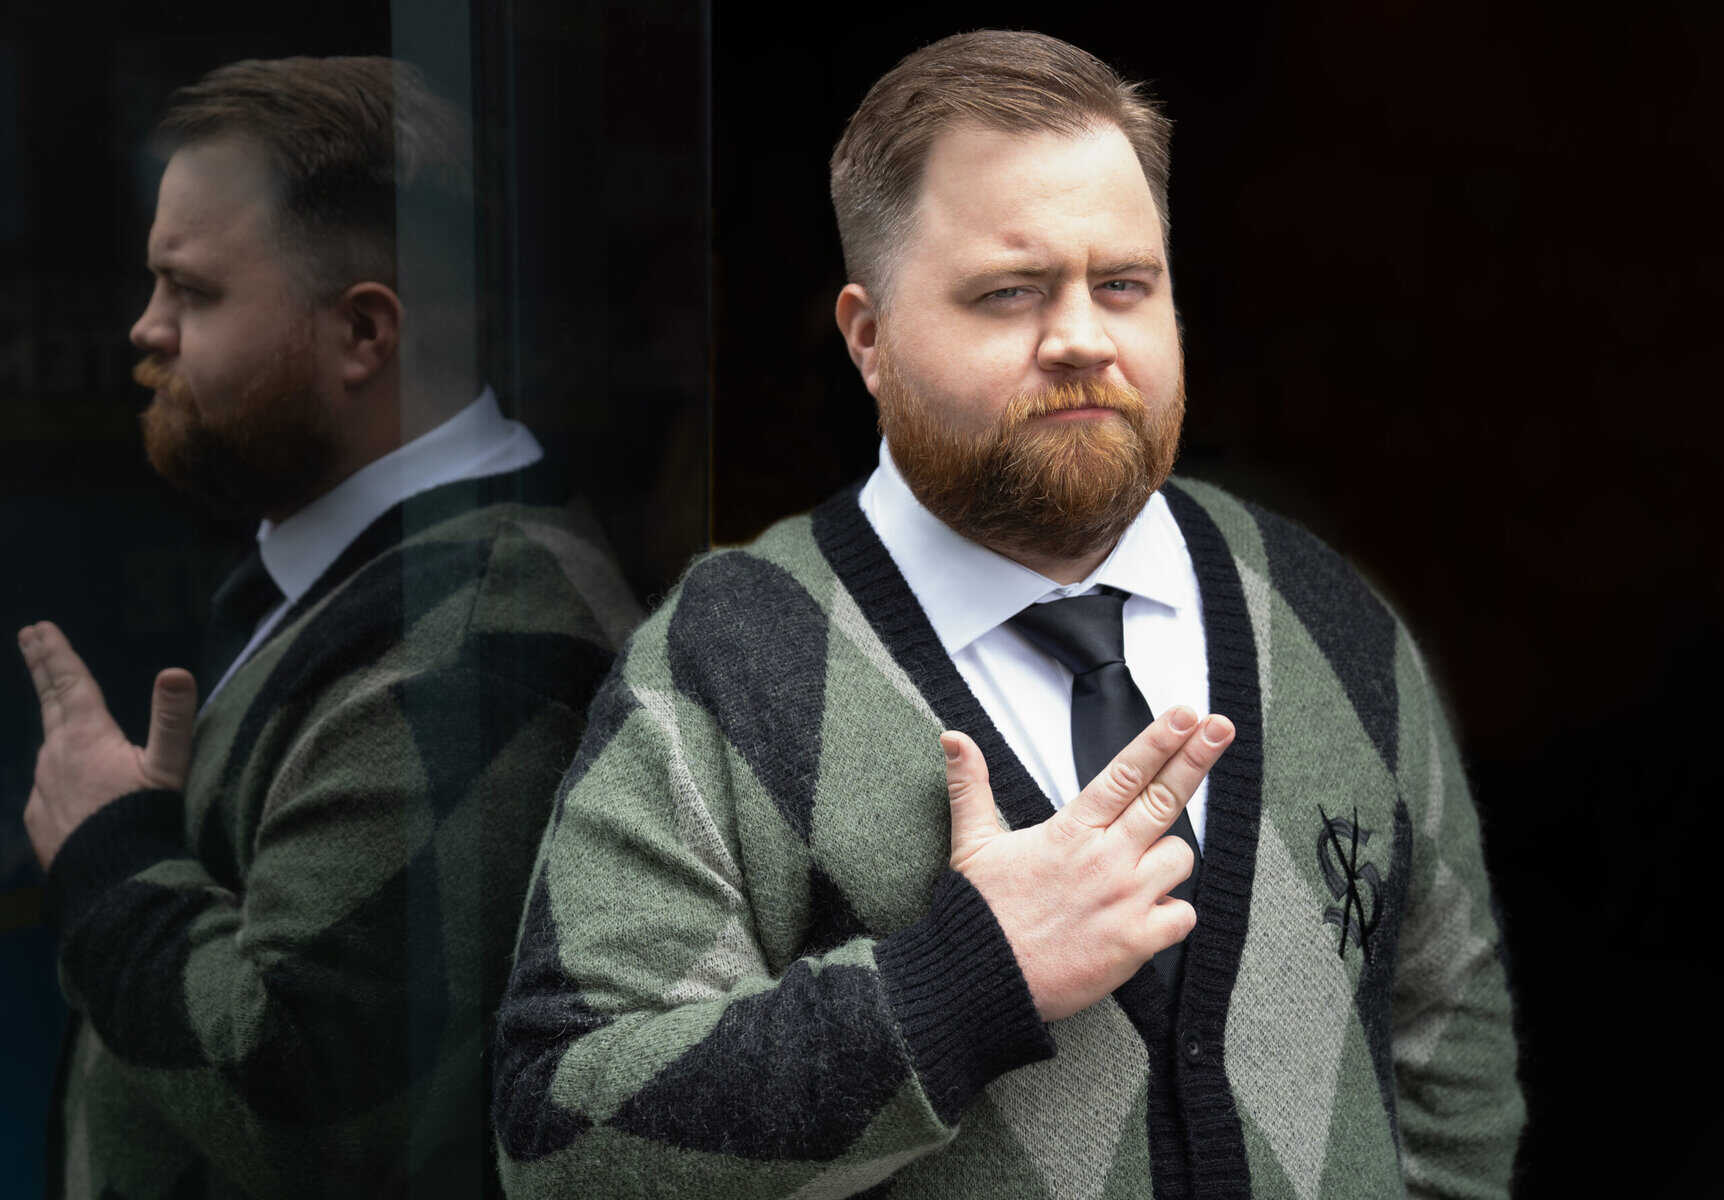 Actor Paul Walter Hauser photographed by Zusha Goldin for Deadline Hollywood